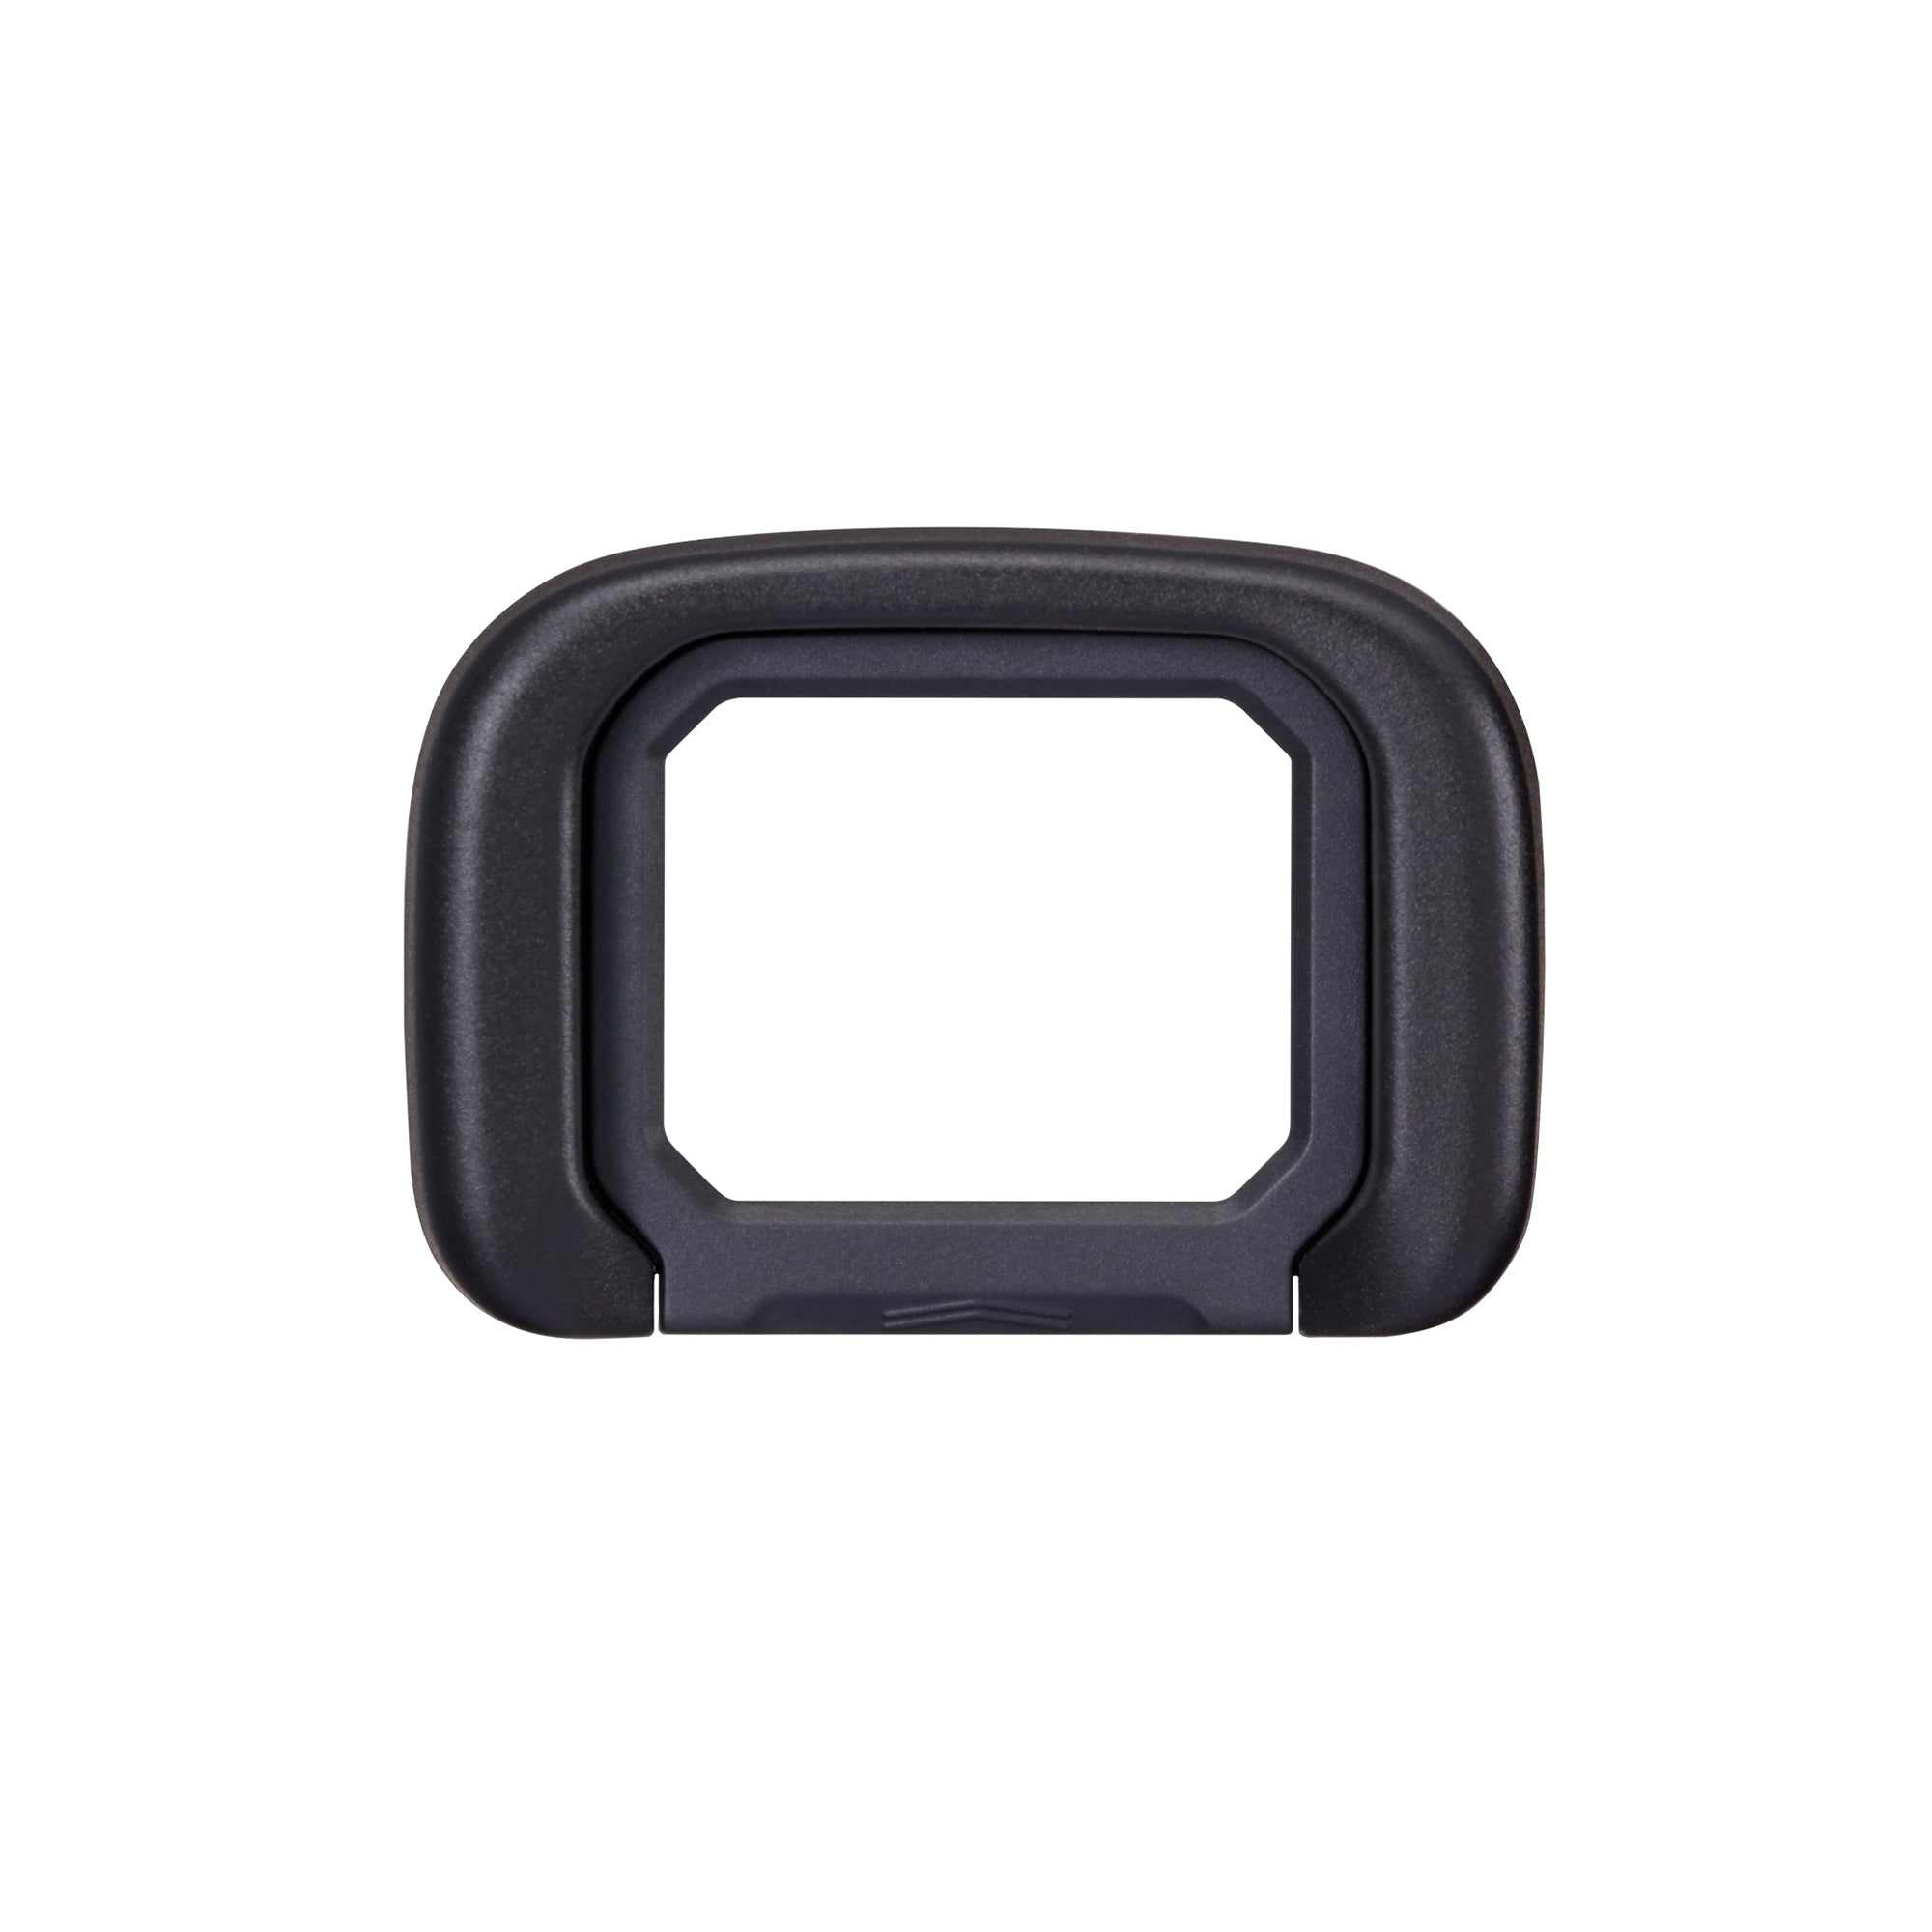 Canon ER-h Small Eyecup for EOS R3